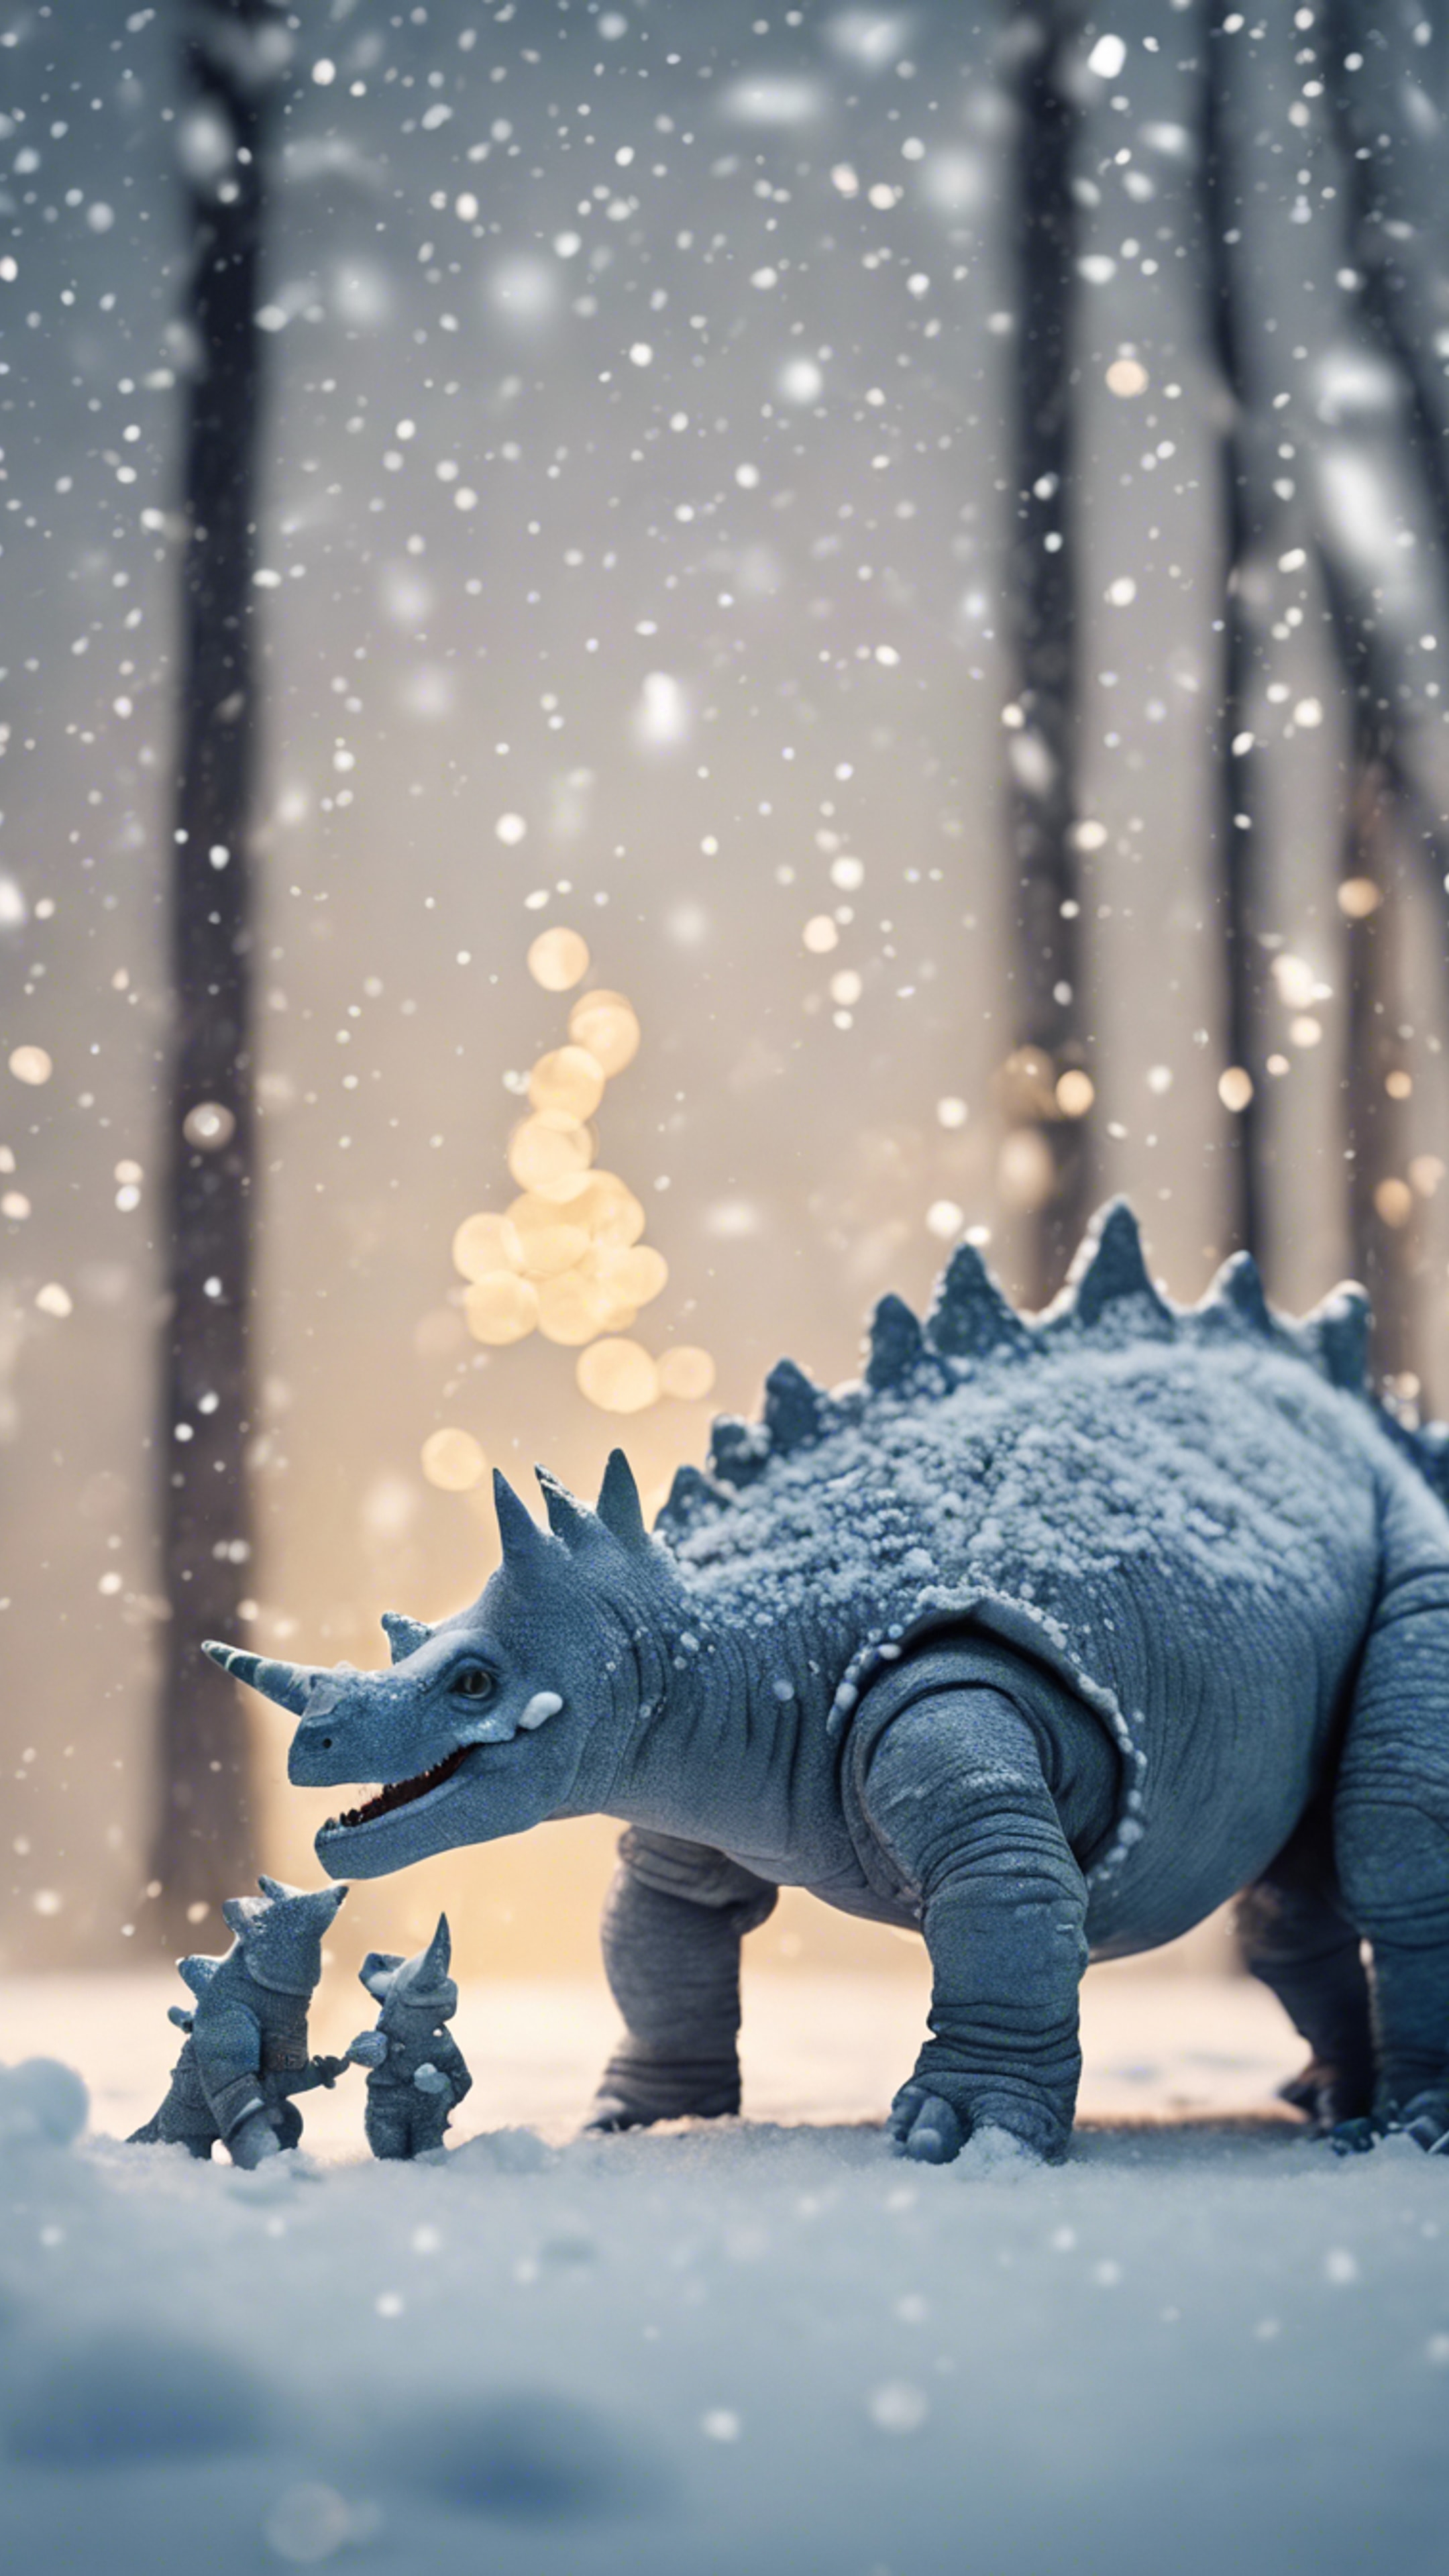 A family of Pachyrhinosaurus making snow dinosaurs in a winter wonderland. Валлпапер[959d968d50614e28908d]